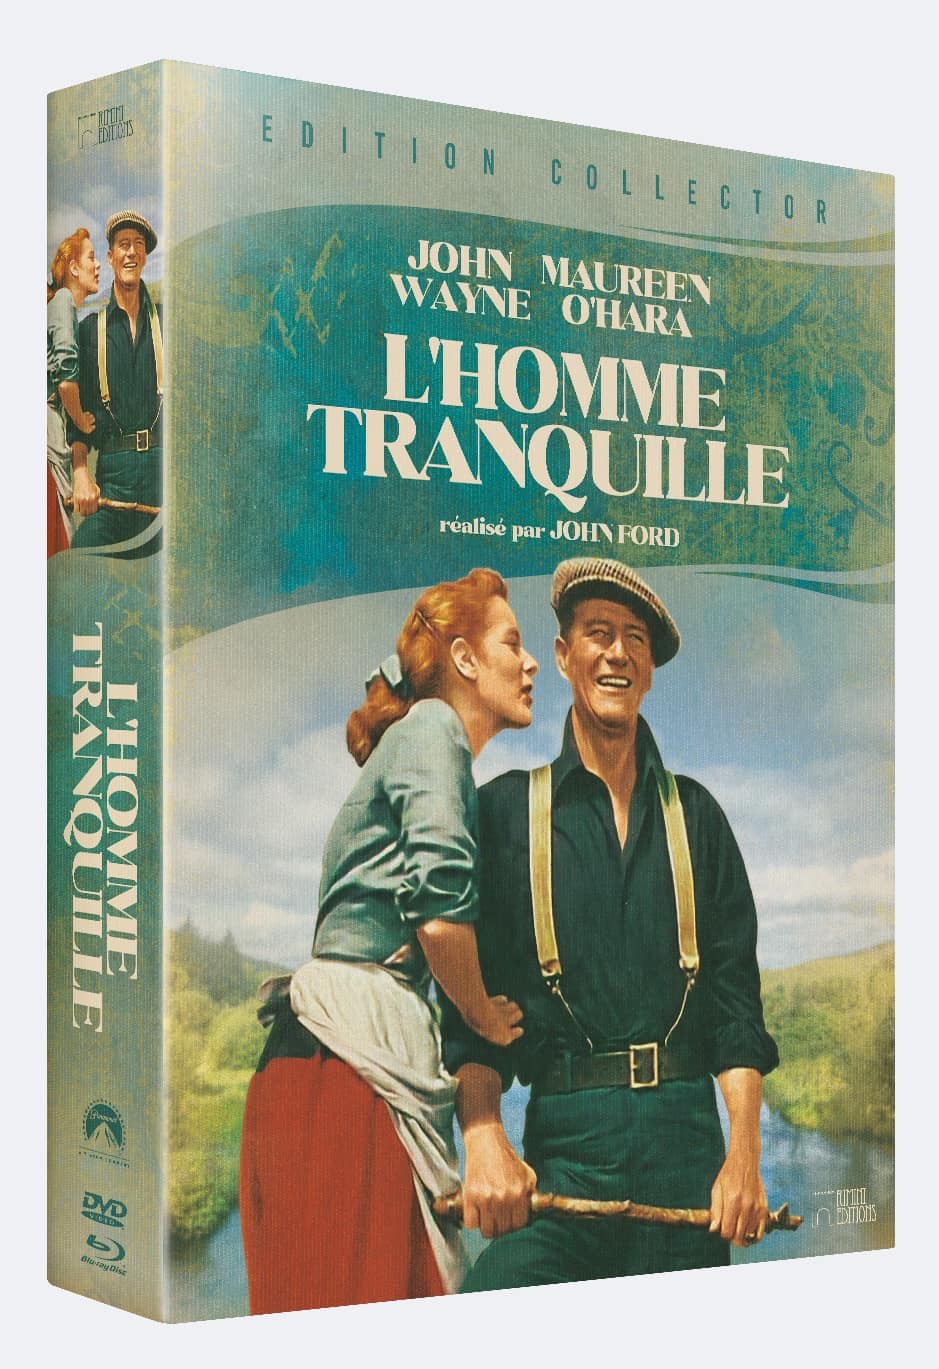 L'HOMME TRANQUILLE - COMBO 2 DVD + 2 BD - EDITION LIMITEE